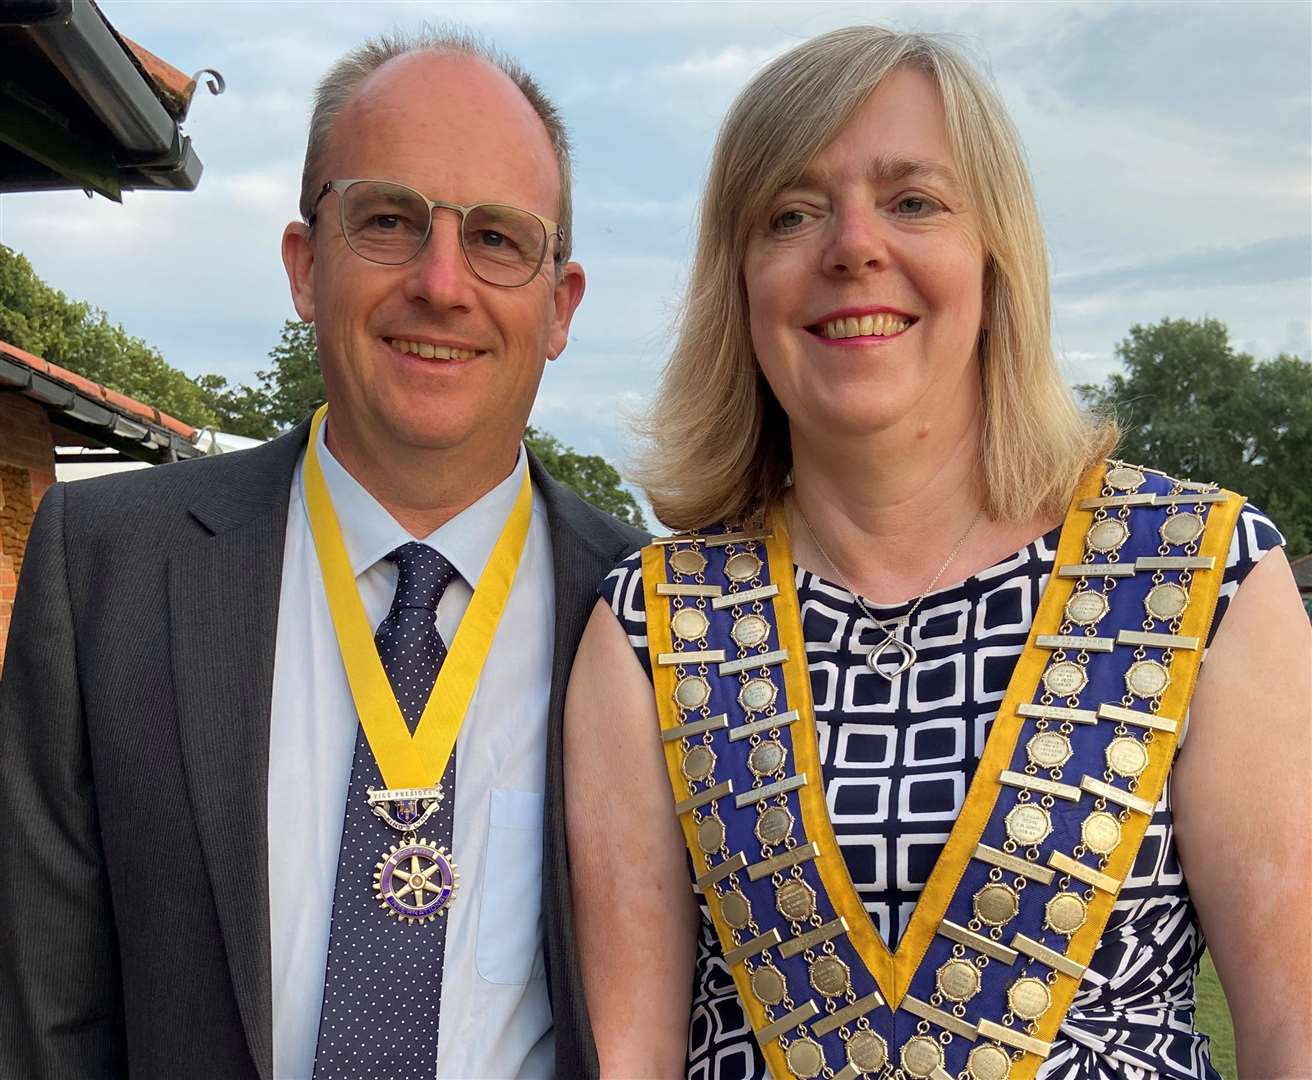 New president nominee of the Rotary Club of King's Lynn Paul Robson, left, and new president Mel Robson